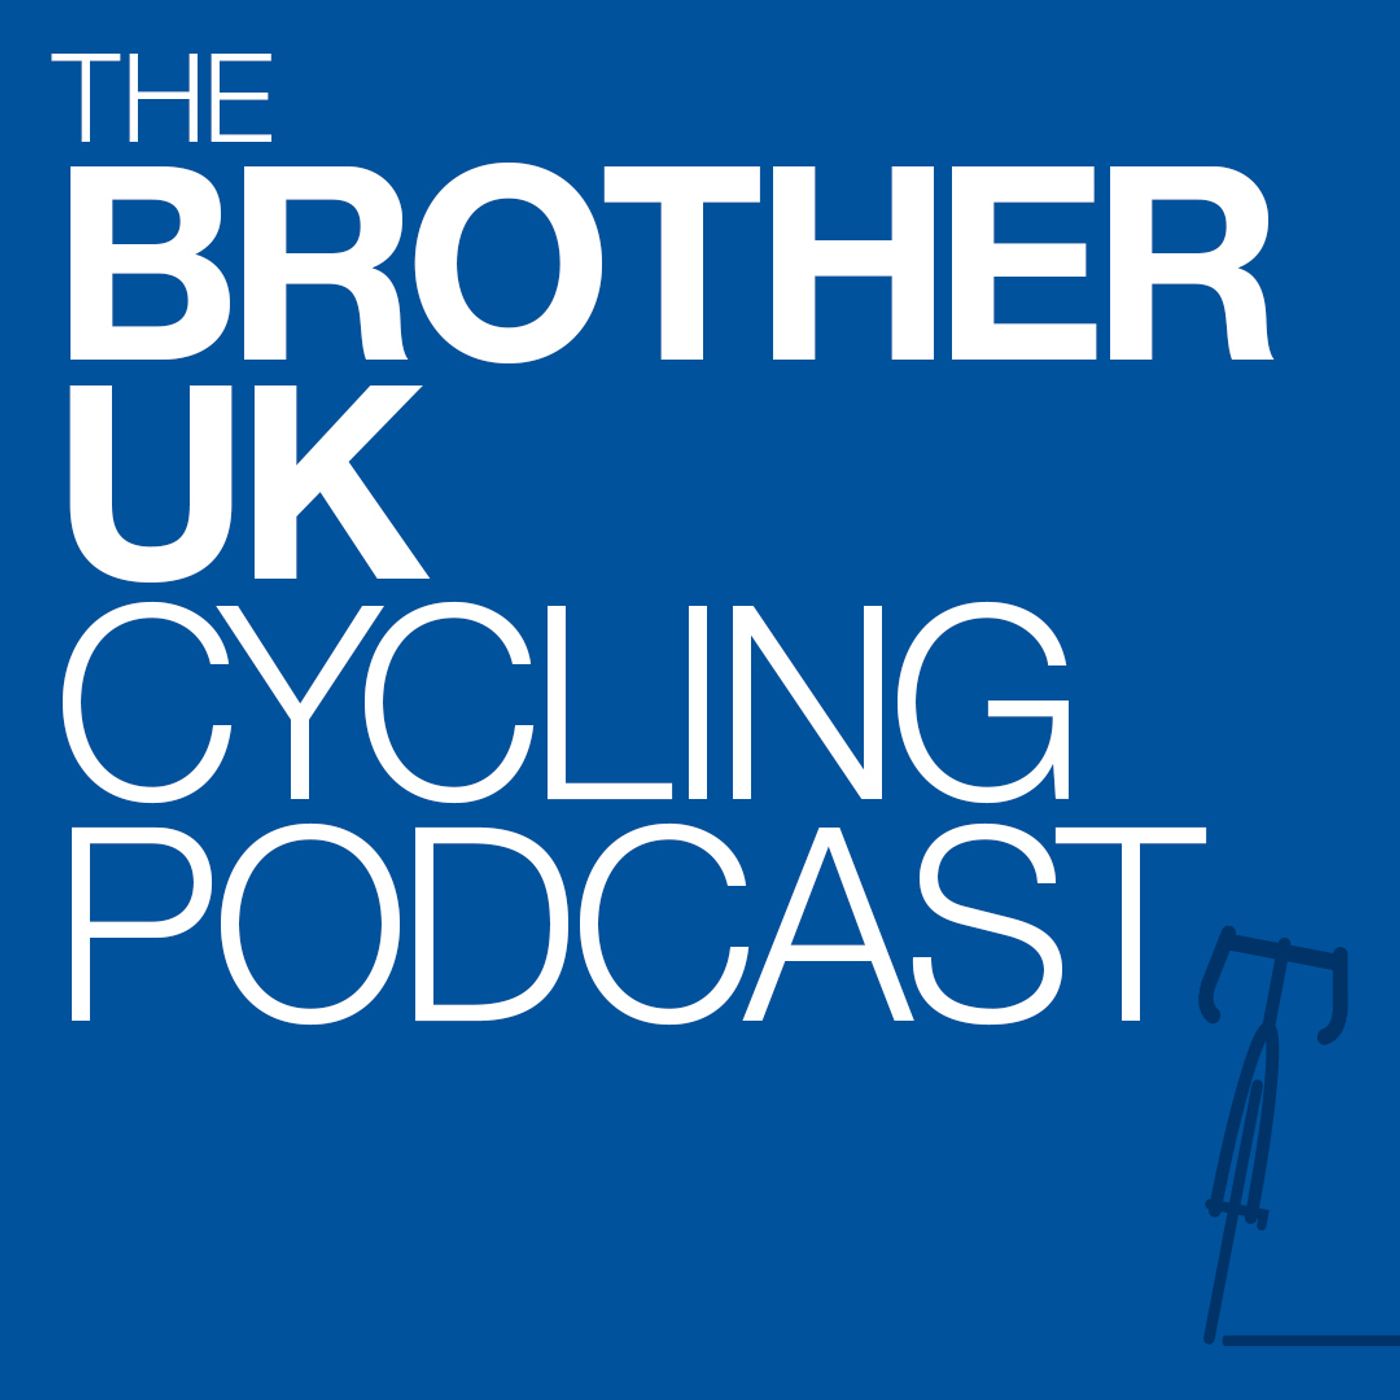 S1 Ep2: Brother UK Cycling Podcast - Dean Downing (part two)